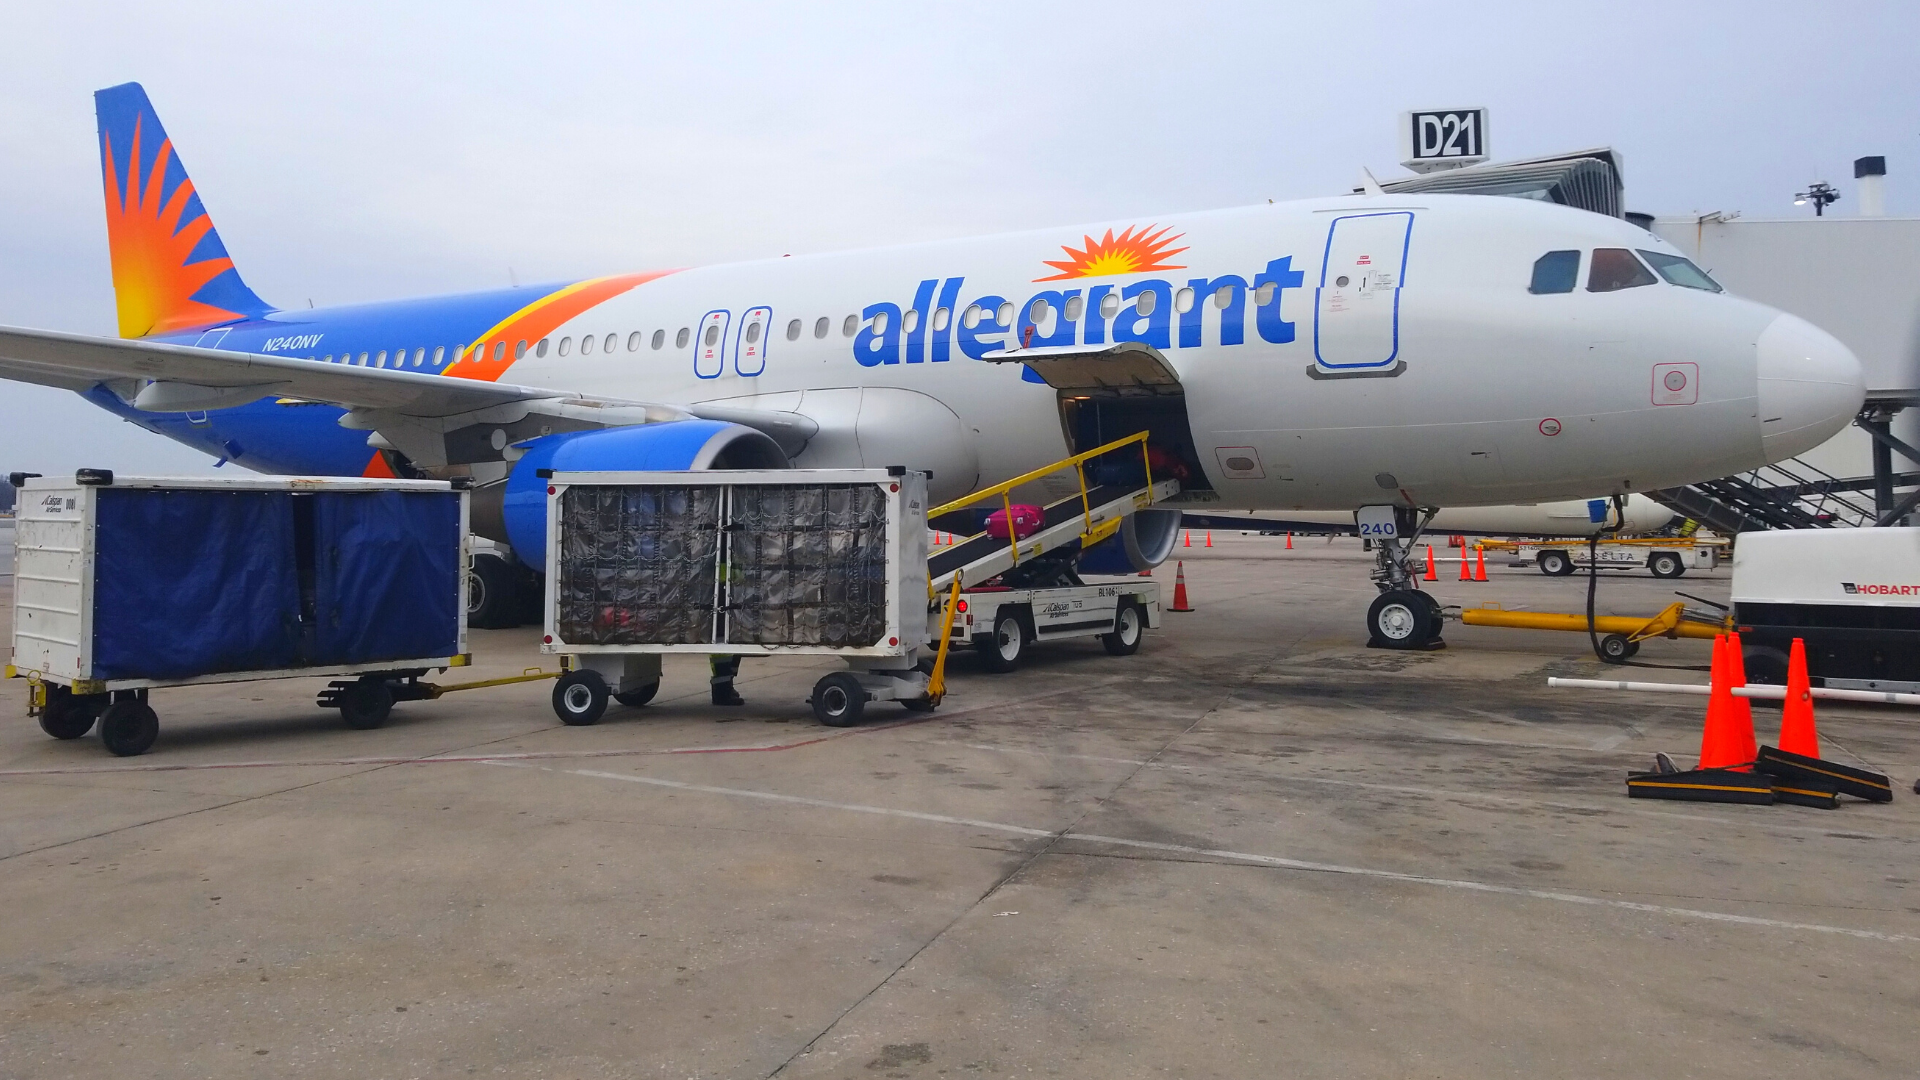 Photograph of an Allegiant aircraft at its gate at BWI Marshall Airport